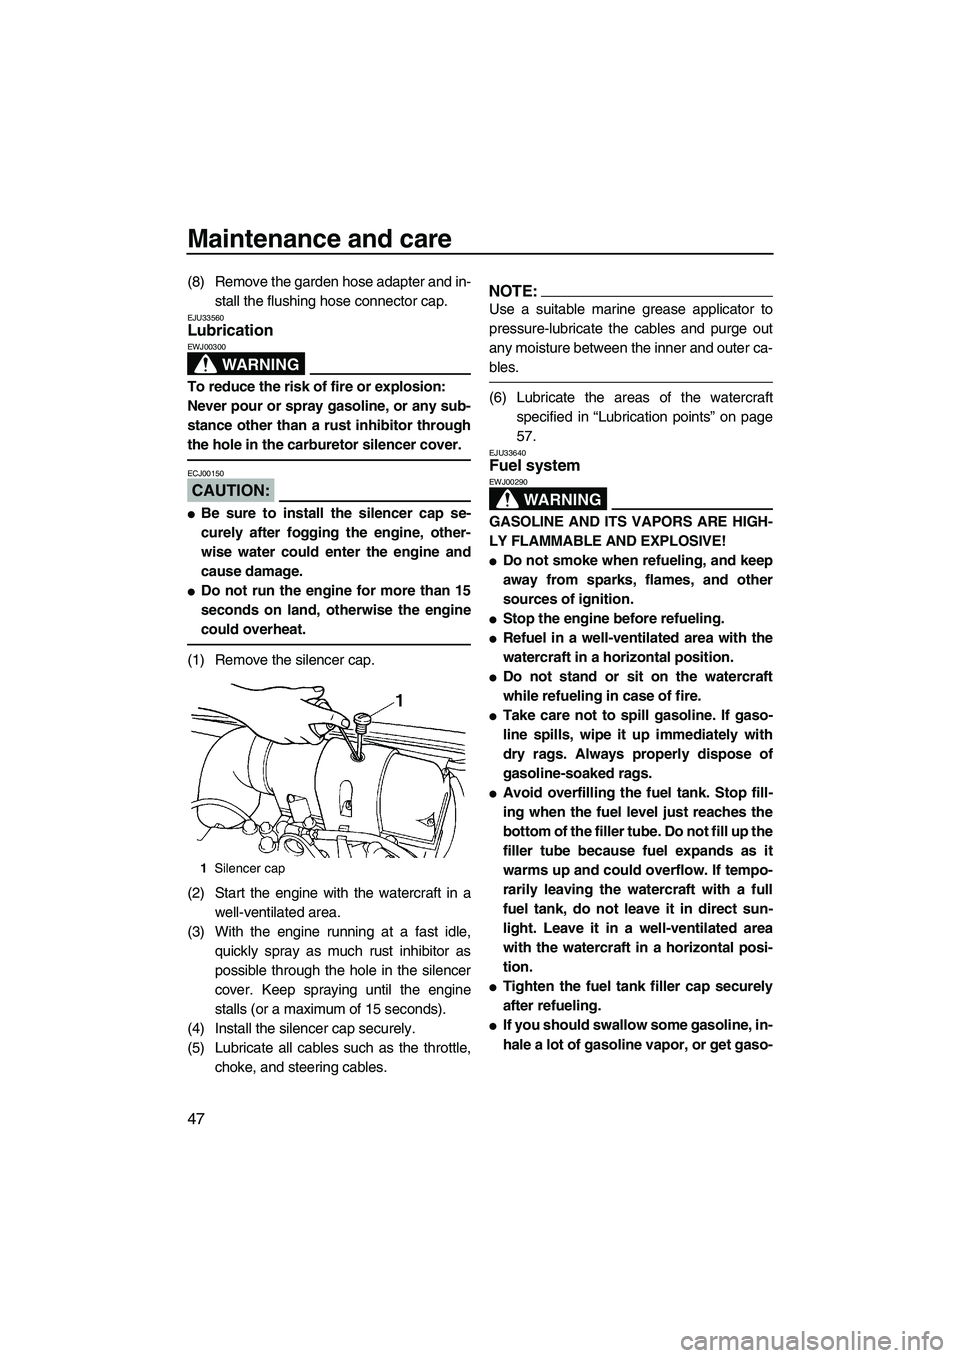 YAMAHA SUPERJET 2007 Owners Guide Maintenance and care
47
(8) Remove the garden hose adapter and in-
stall the flushing hose connector cap.
EJU33560Lubrication 
WARNING
EWJ00300
To reduce the risk of fire or explosion:
Never pour or s